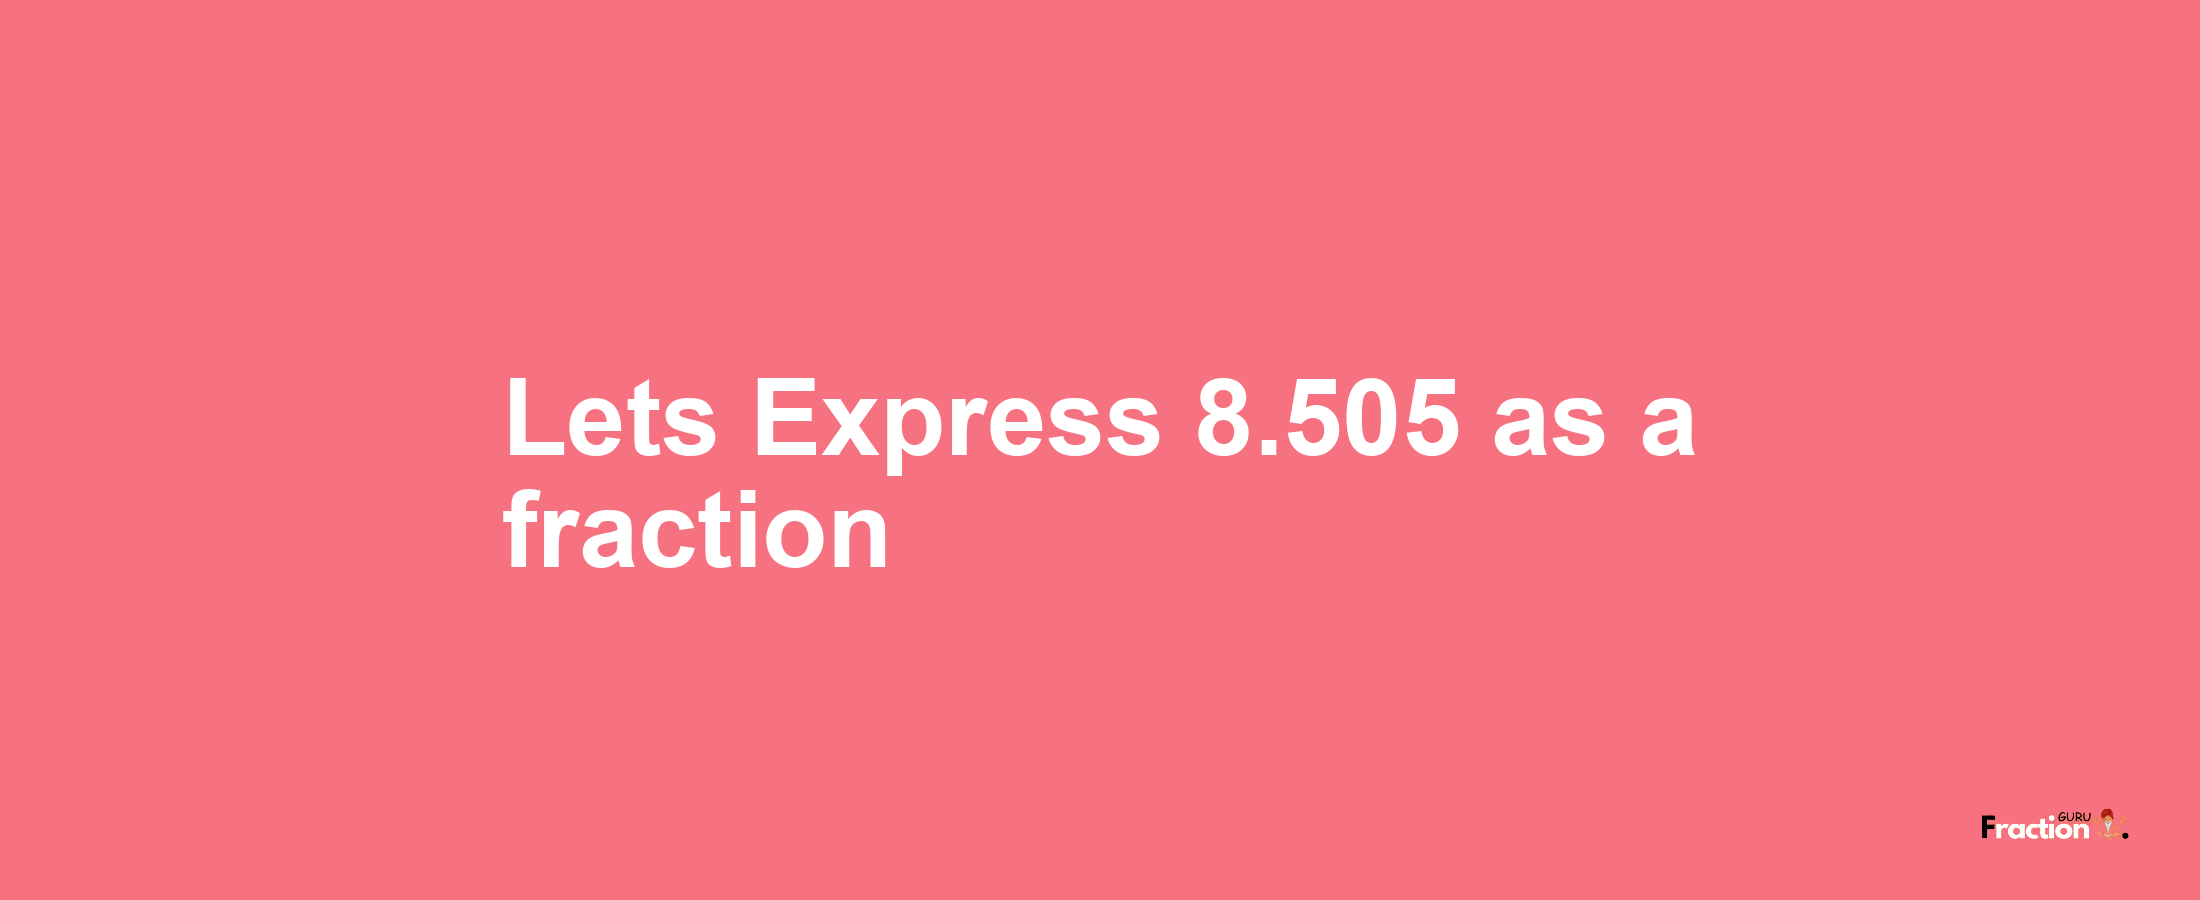 Lets Express 8.505 as afraction